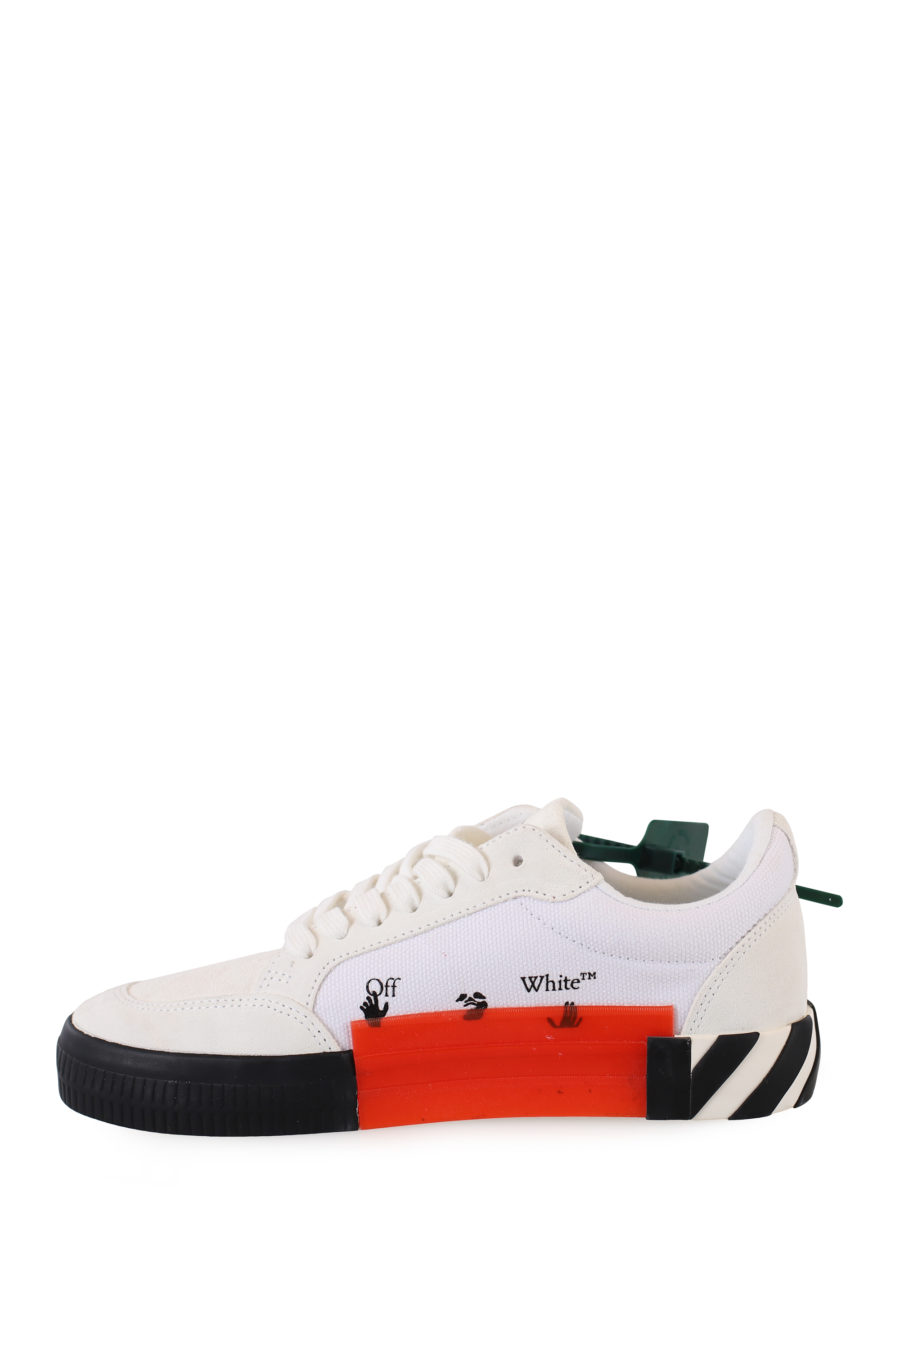 White "vulcanized" shoes with red arrows - IMG 2253